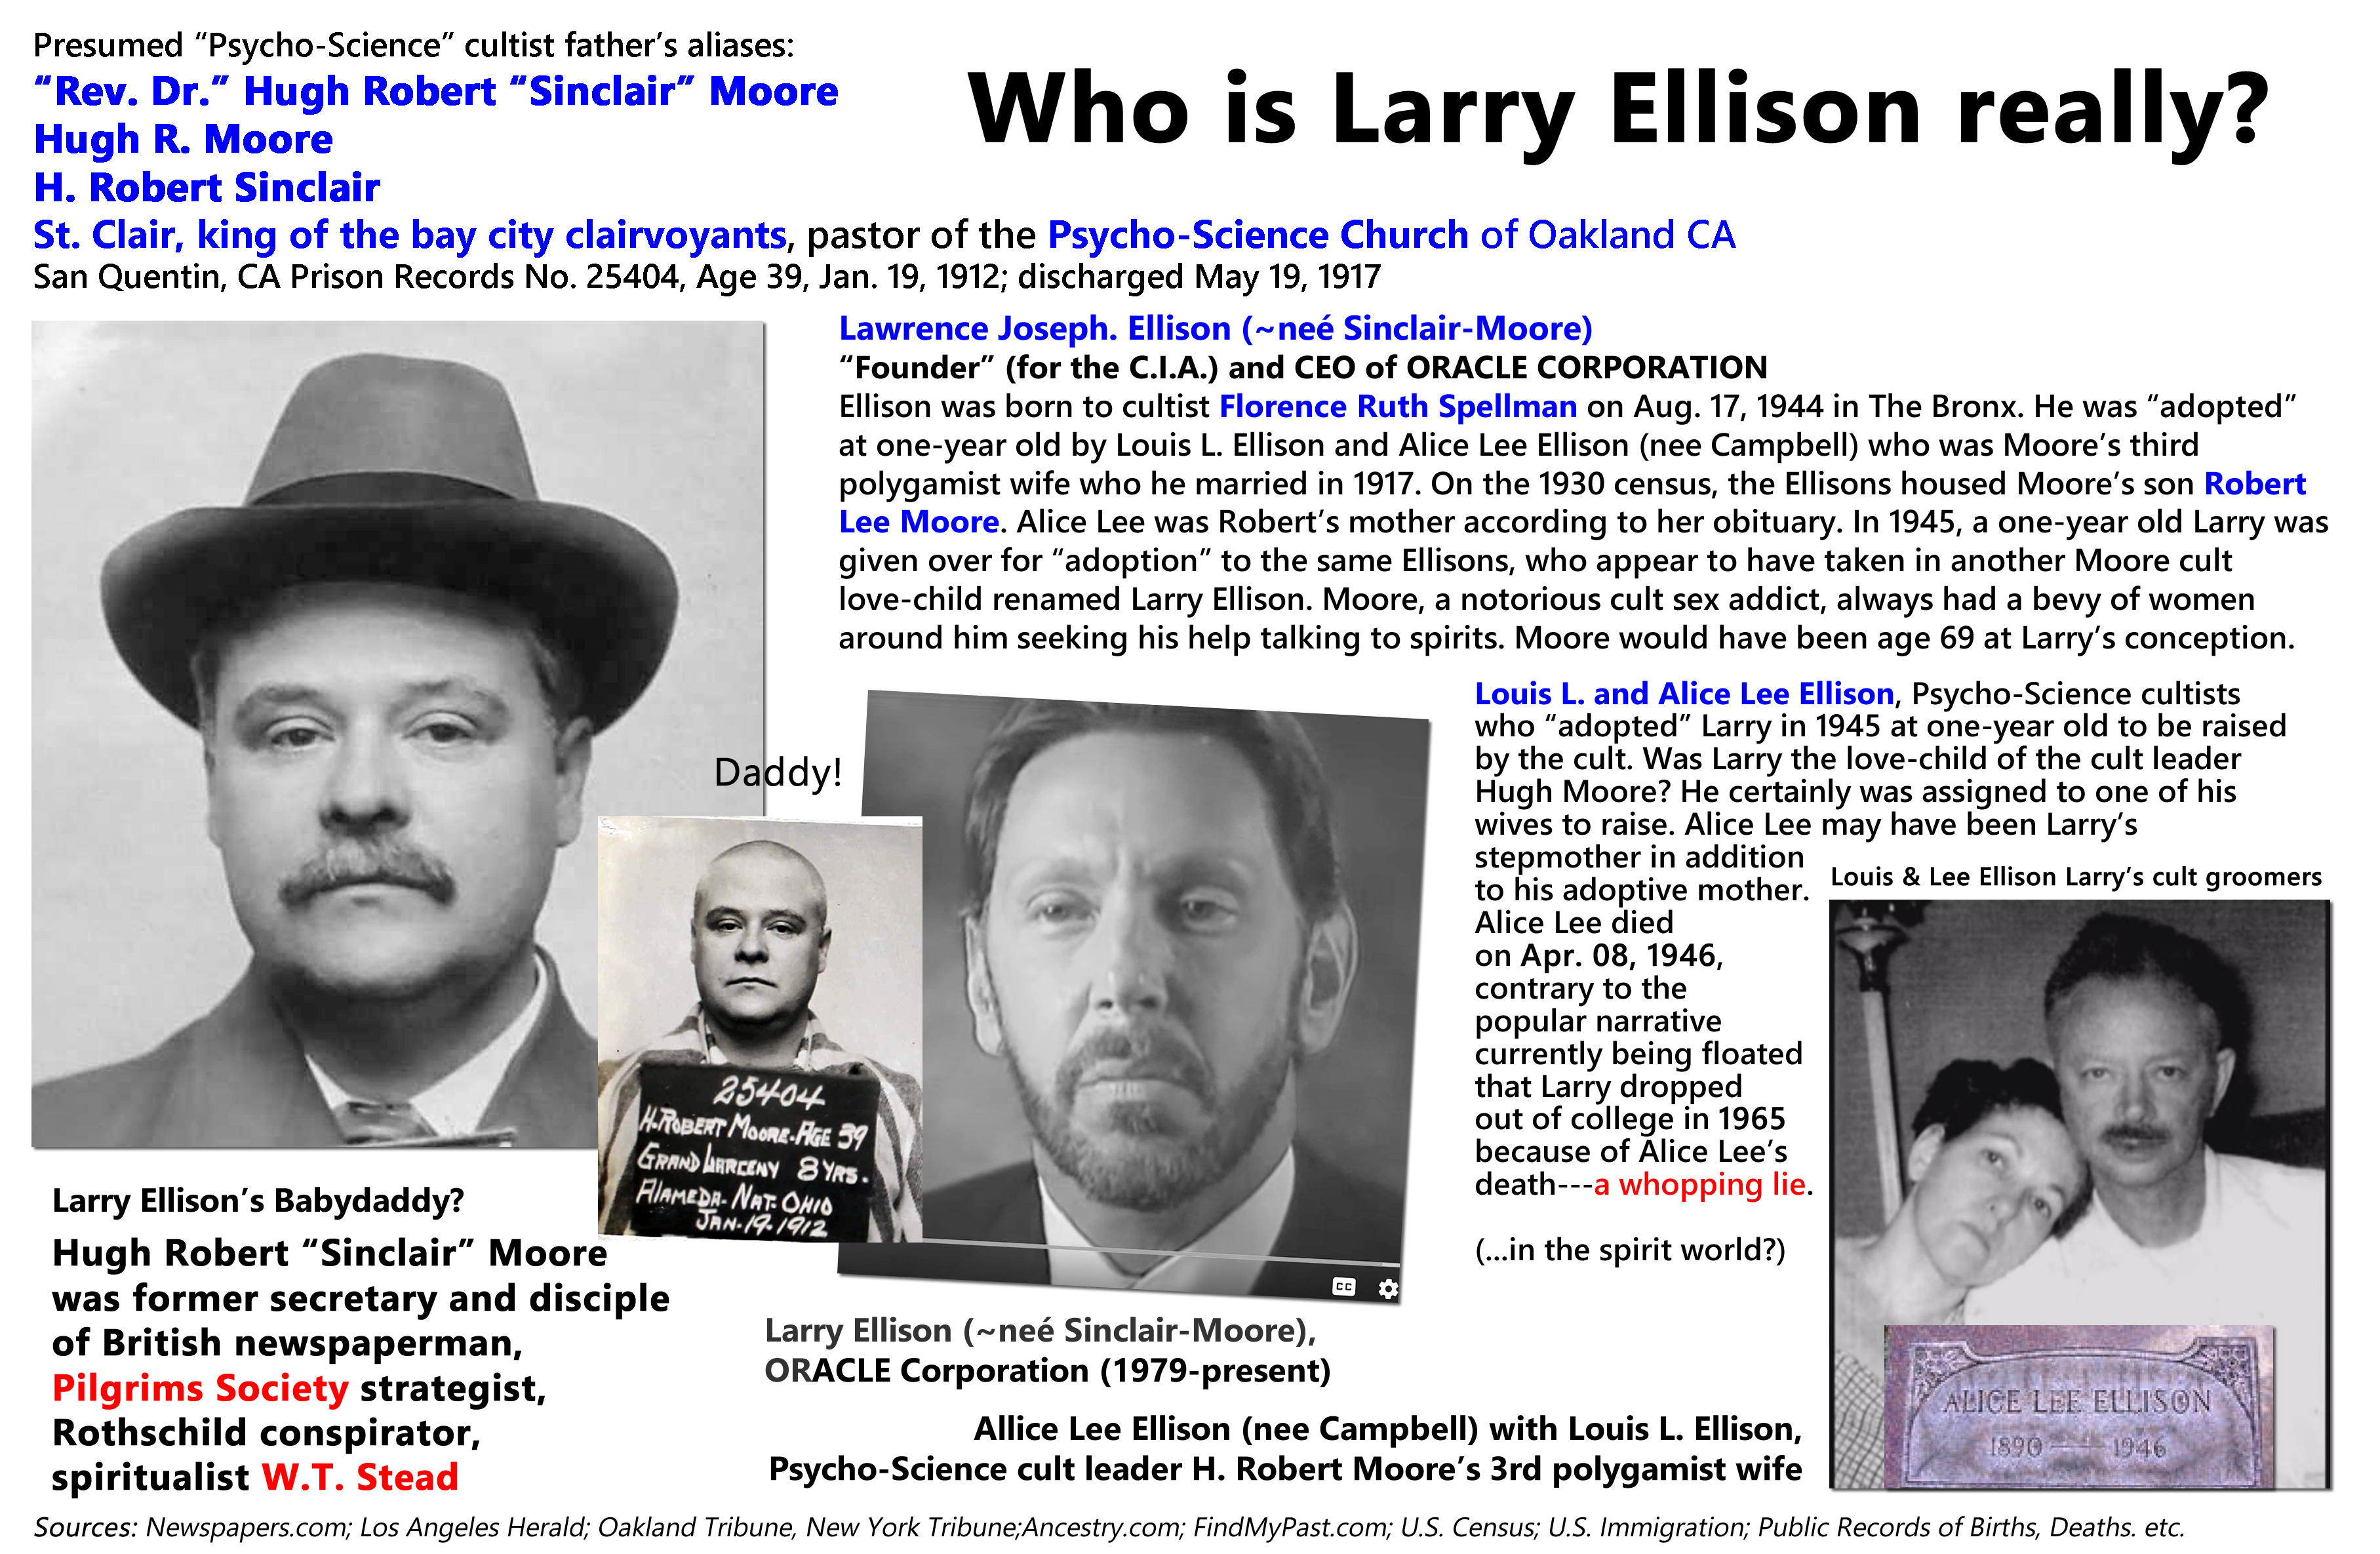 Who is Larry Ellison really?